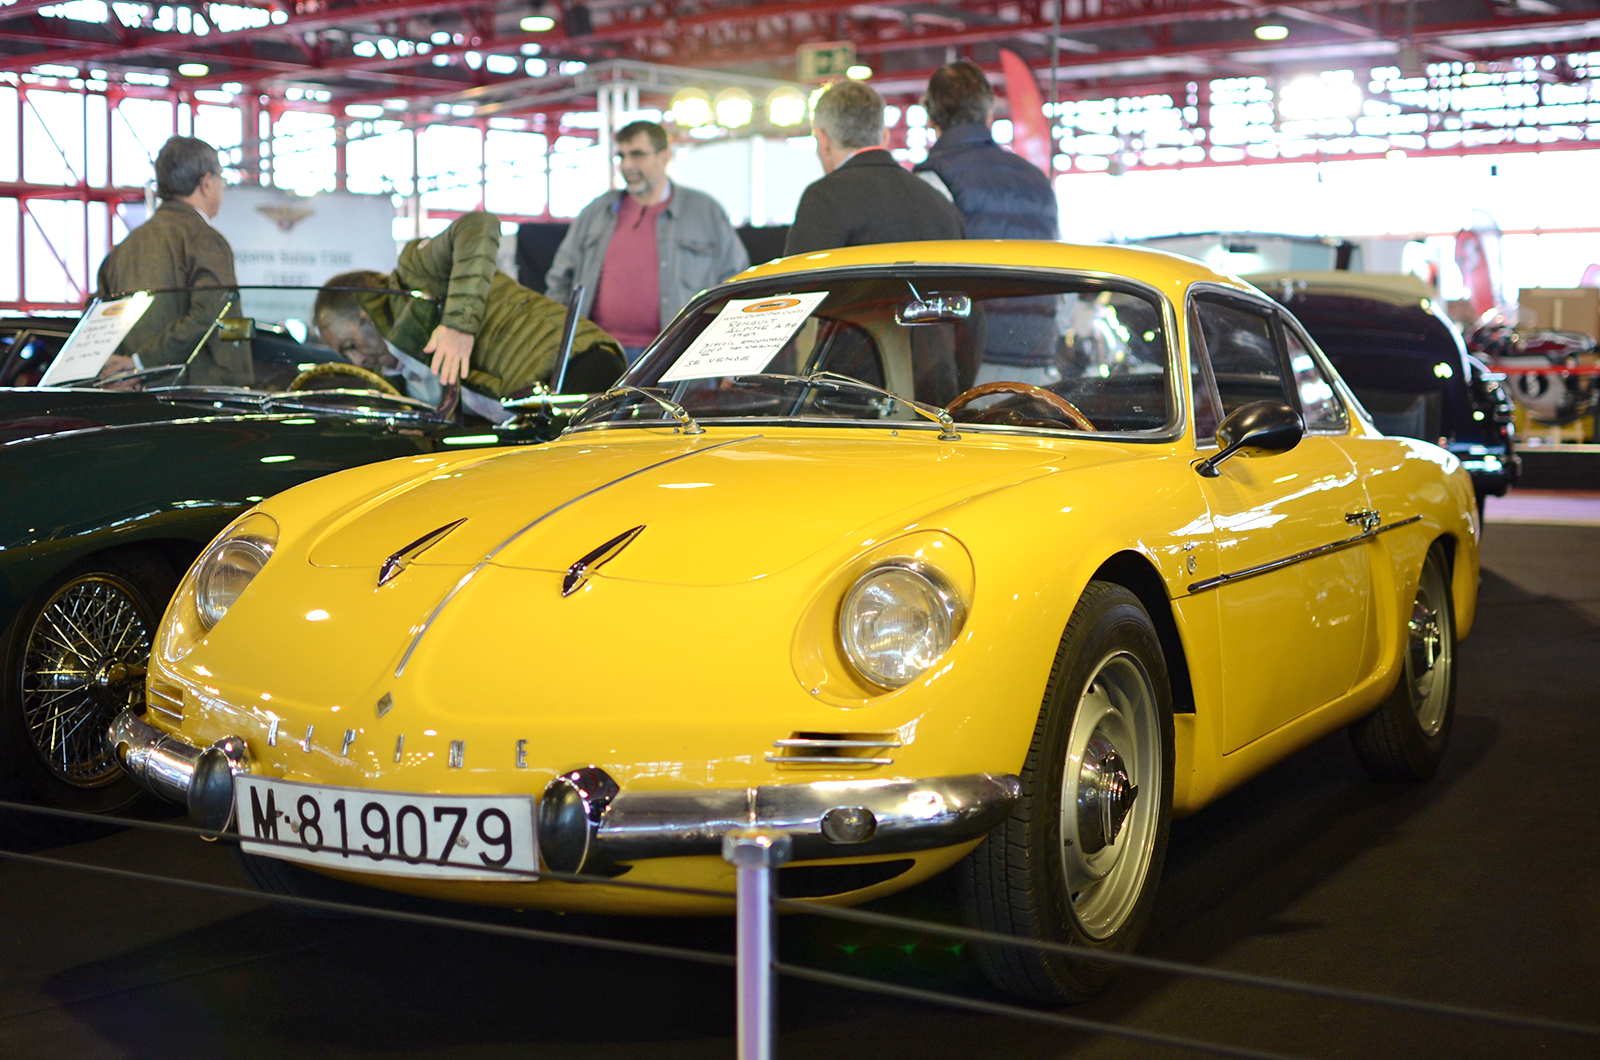 Classic & Sports Car – Seat, Citroën and Bentley shine at ClassicAuto Madrid